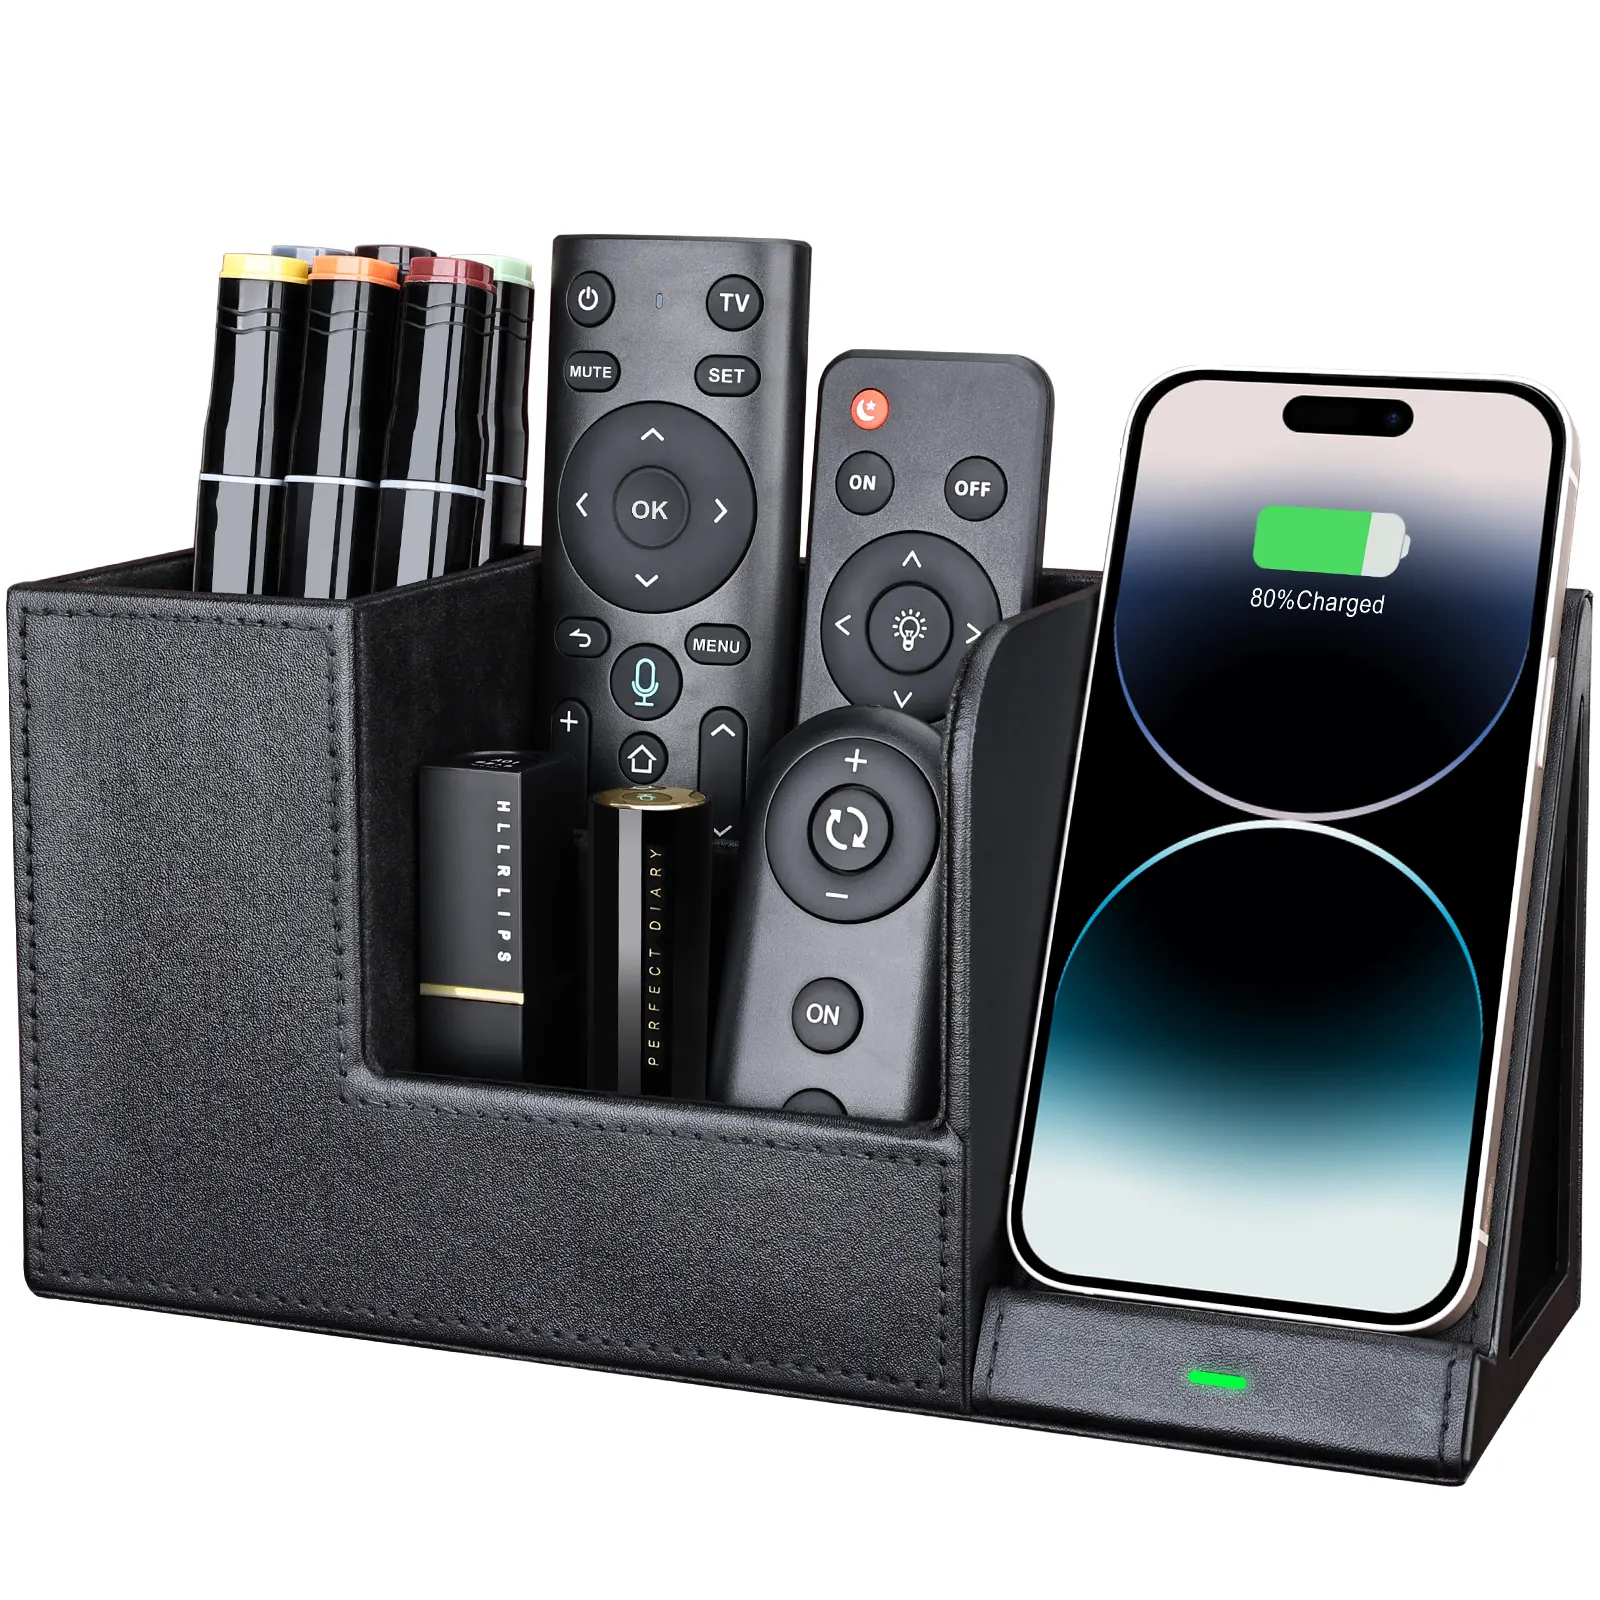 Custom 2 in 1 Pen Desktop Organizer Leather Charging Station Wireless Phone Charging Stand Holders